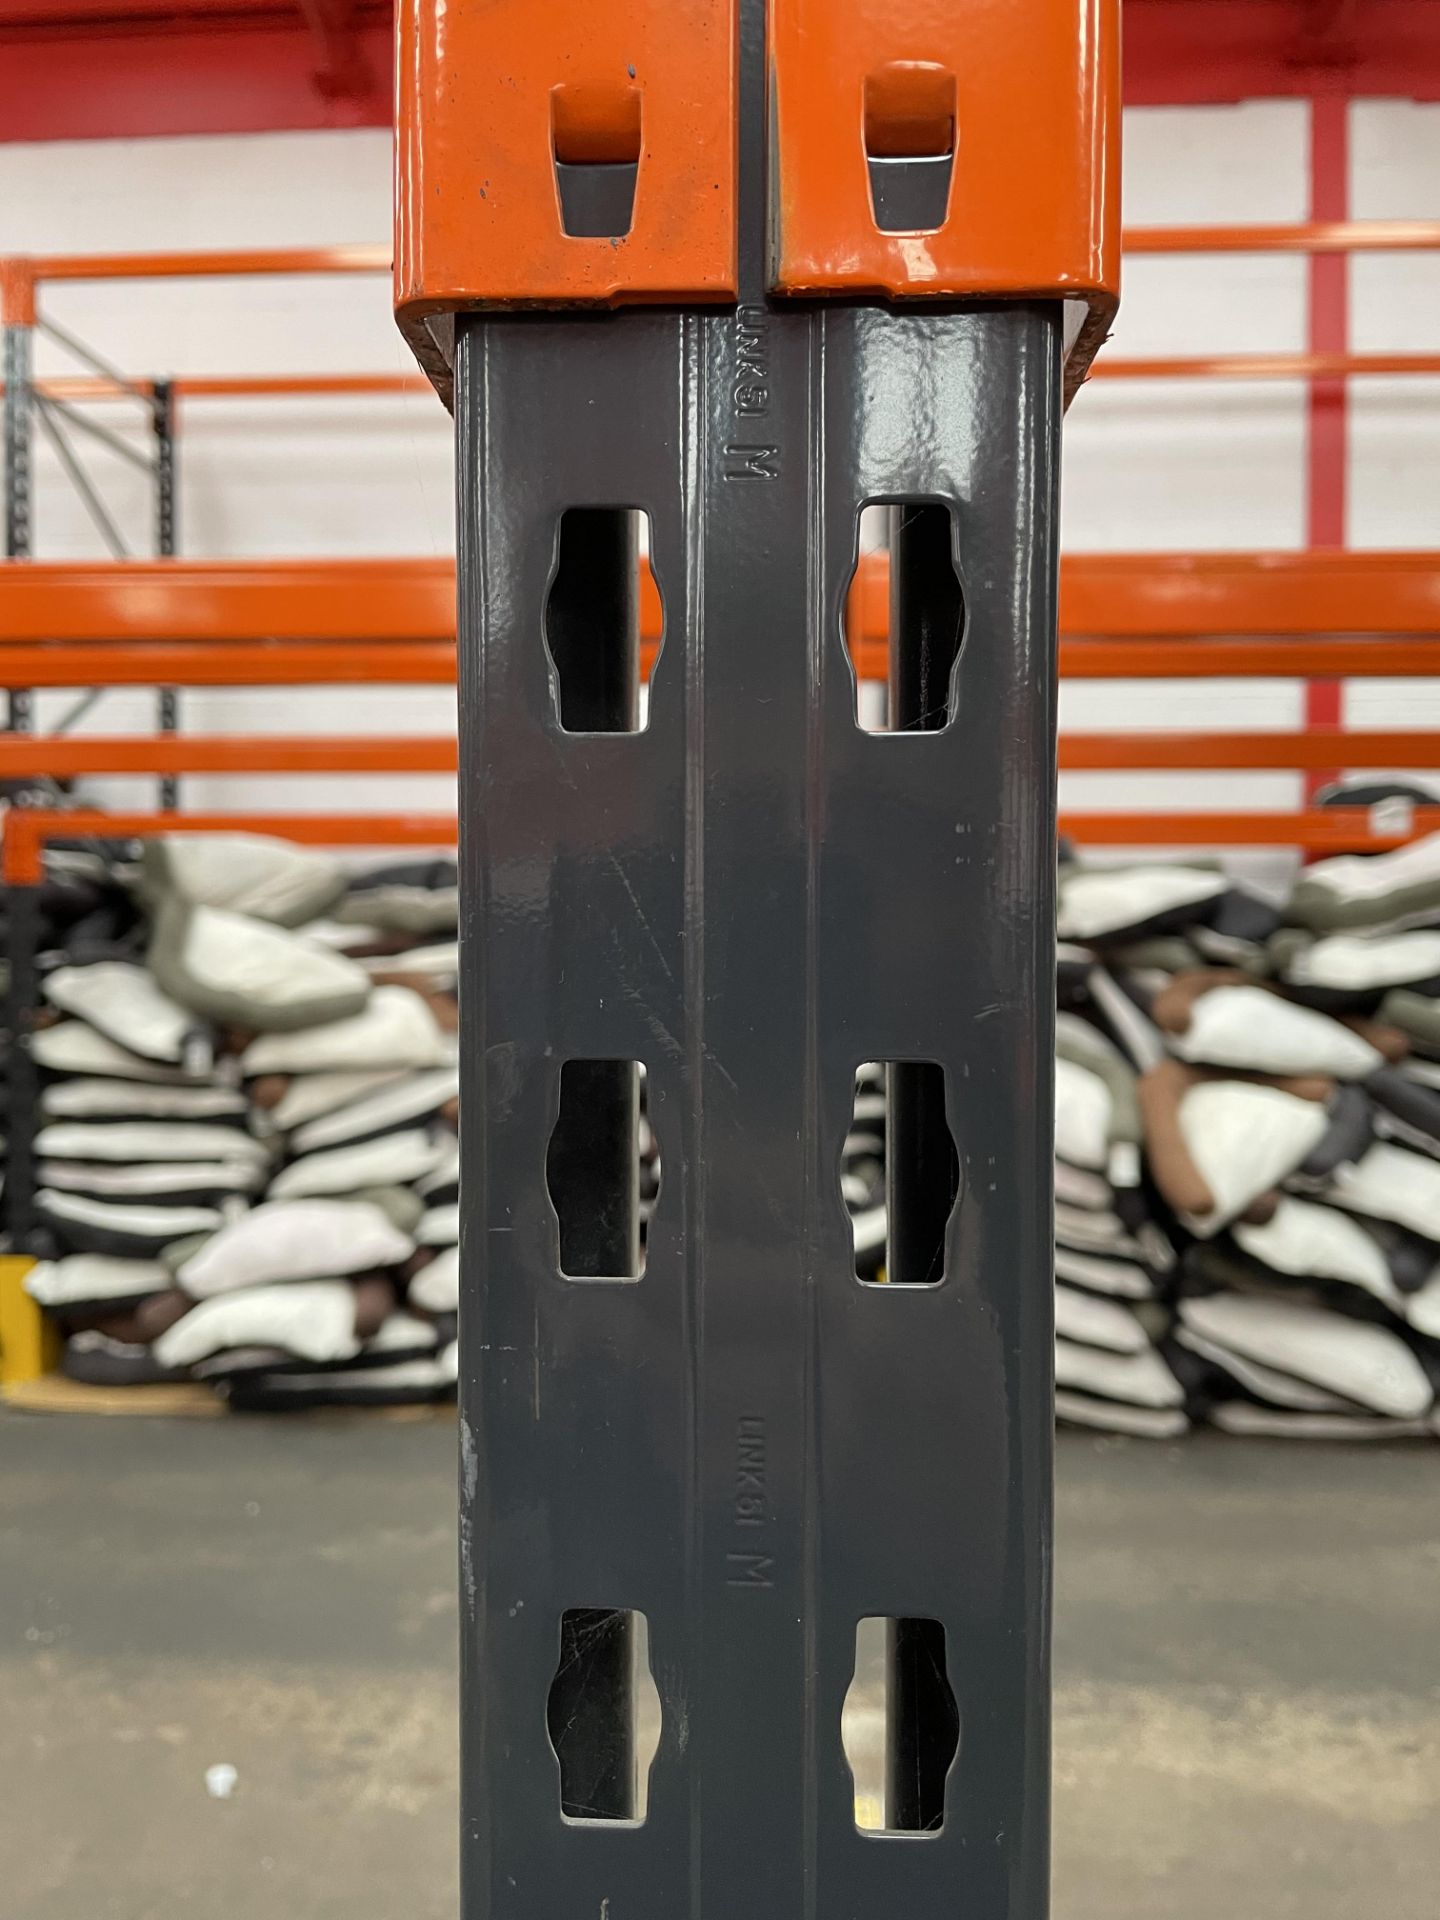 21 Bays of Link 51 Pallet Racking w/ Protection Barriers | CONTENTS NOT INCLUDED - Image 4 of 5